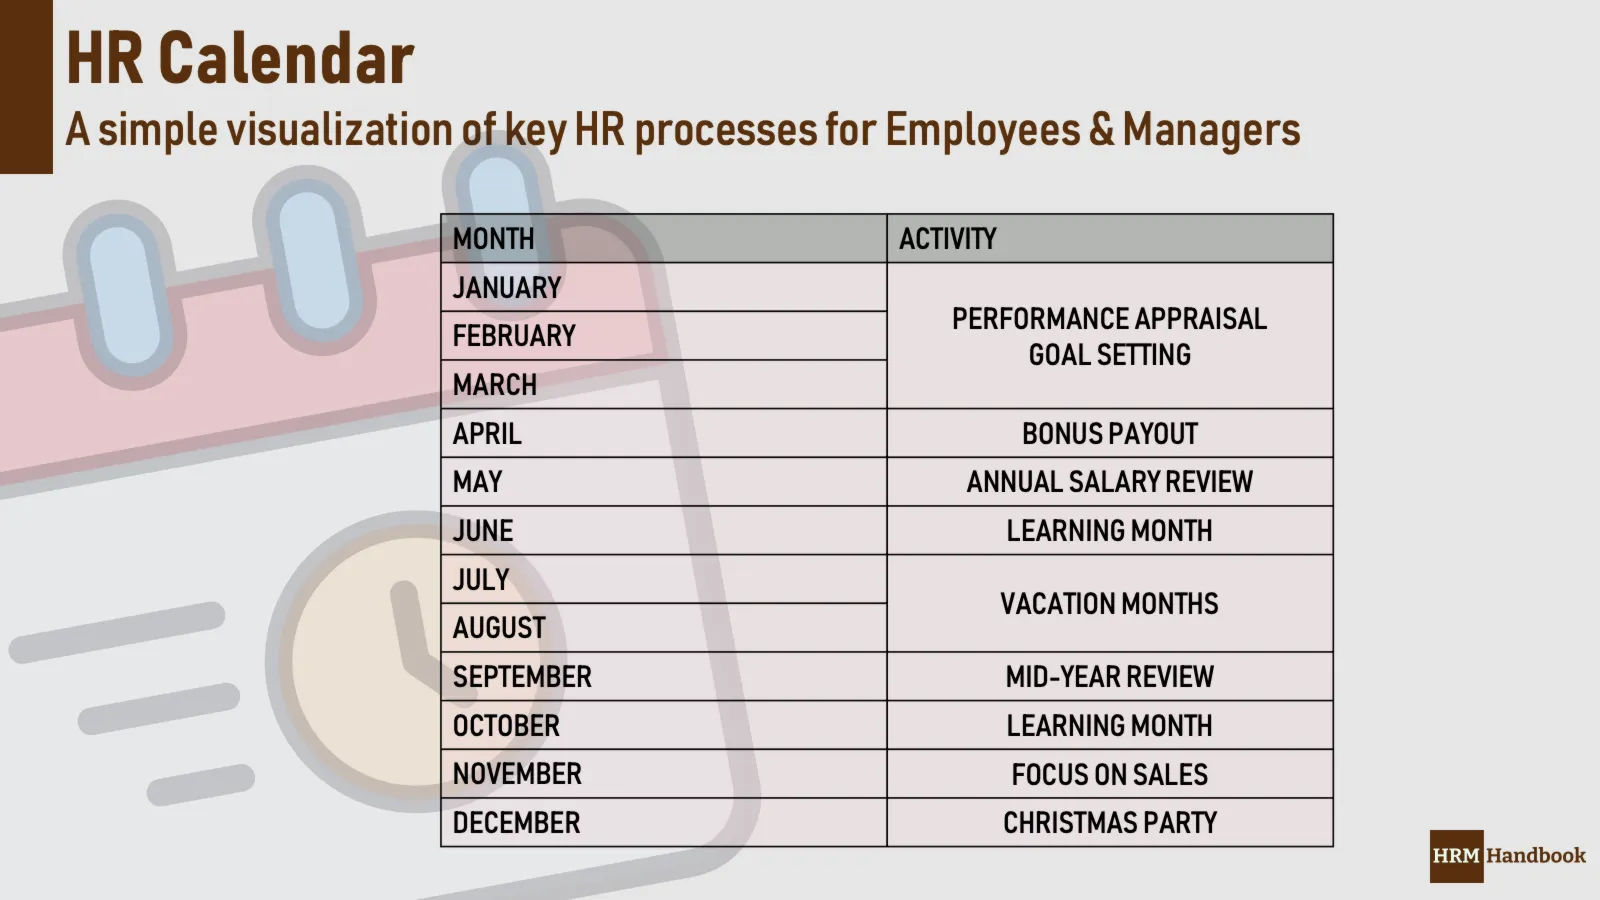 HR Calendar: A simple tool to show key HR processes within a year